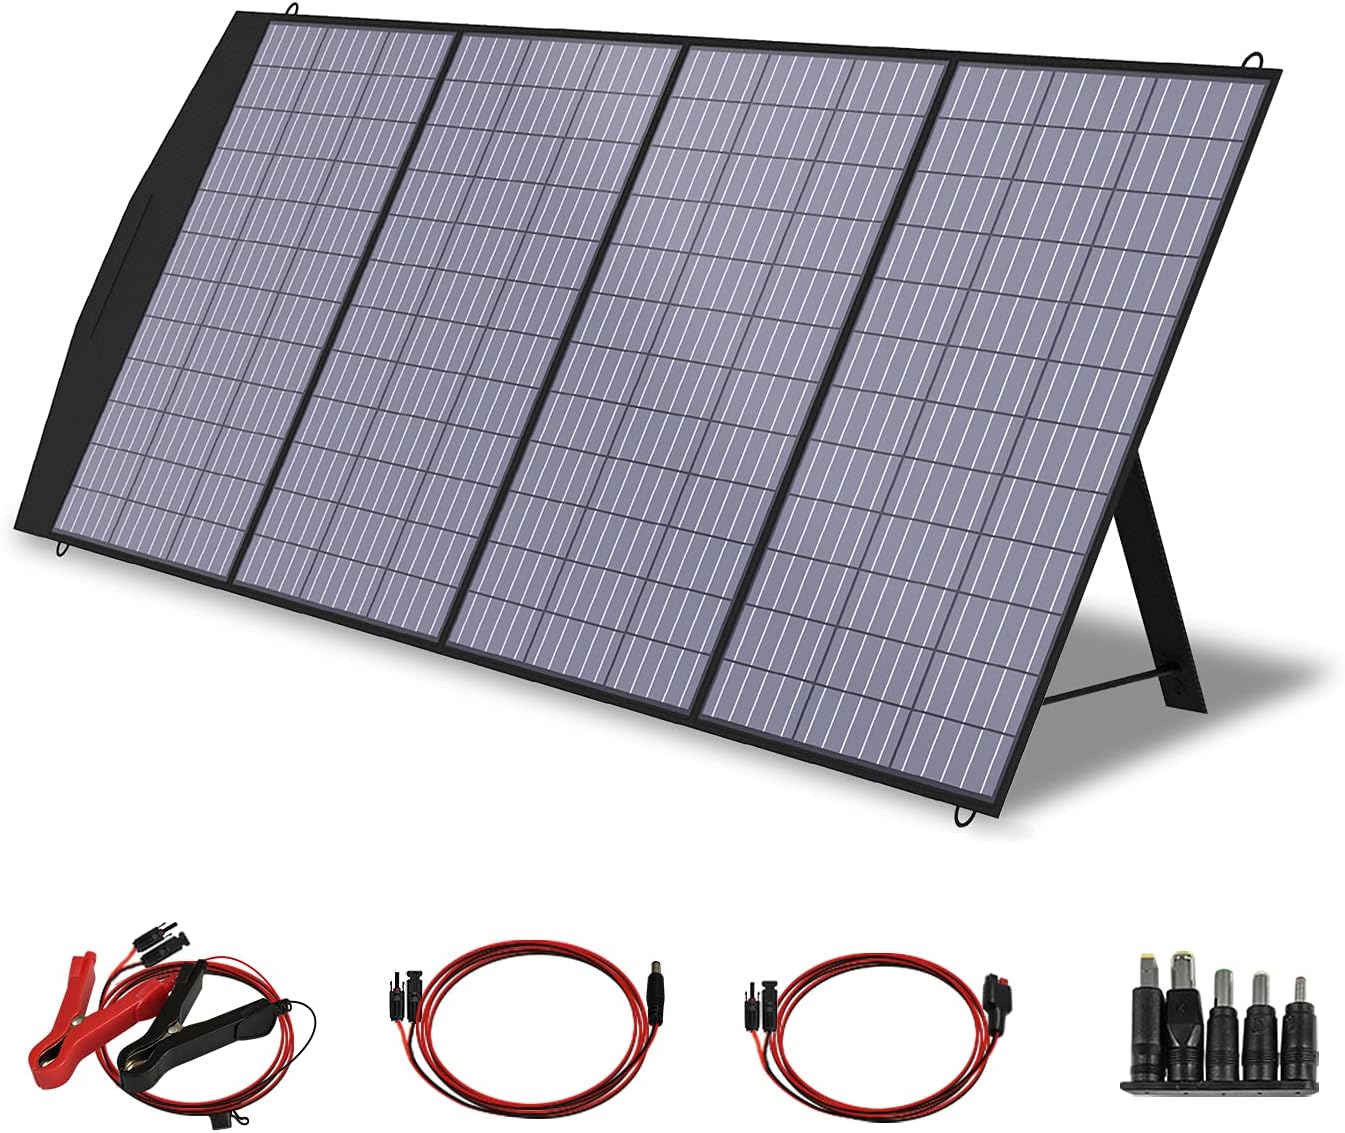 ALLPOWERS SP033 200W Portable Solar Panel 18V Foldable Solar Panel Kit with MC-4 Output Waterproof IP66 Solar Charger for RV Laptops Solar Generator Van Camping Off-Grid - ALLPOWERS SP033 200W Portable Solar Panel Kit Review